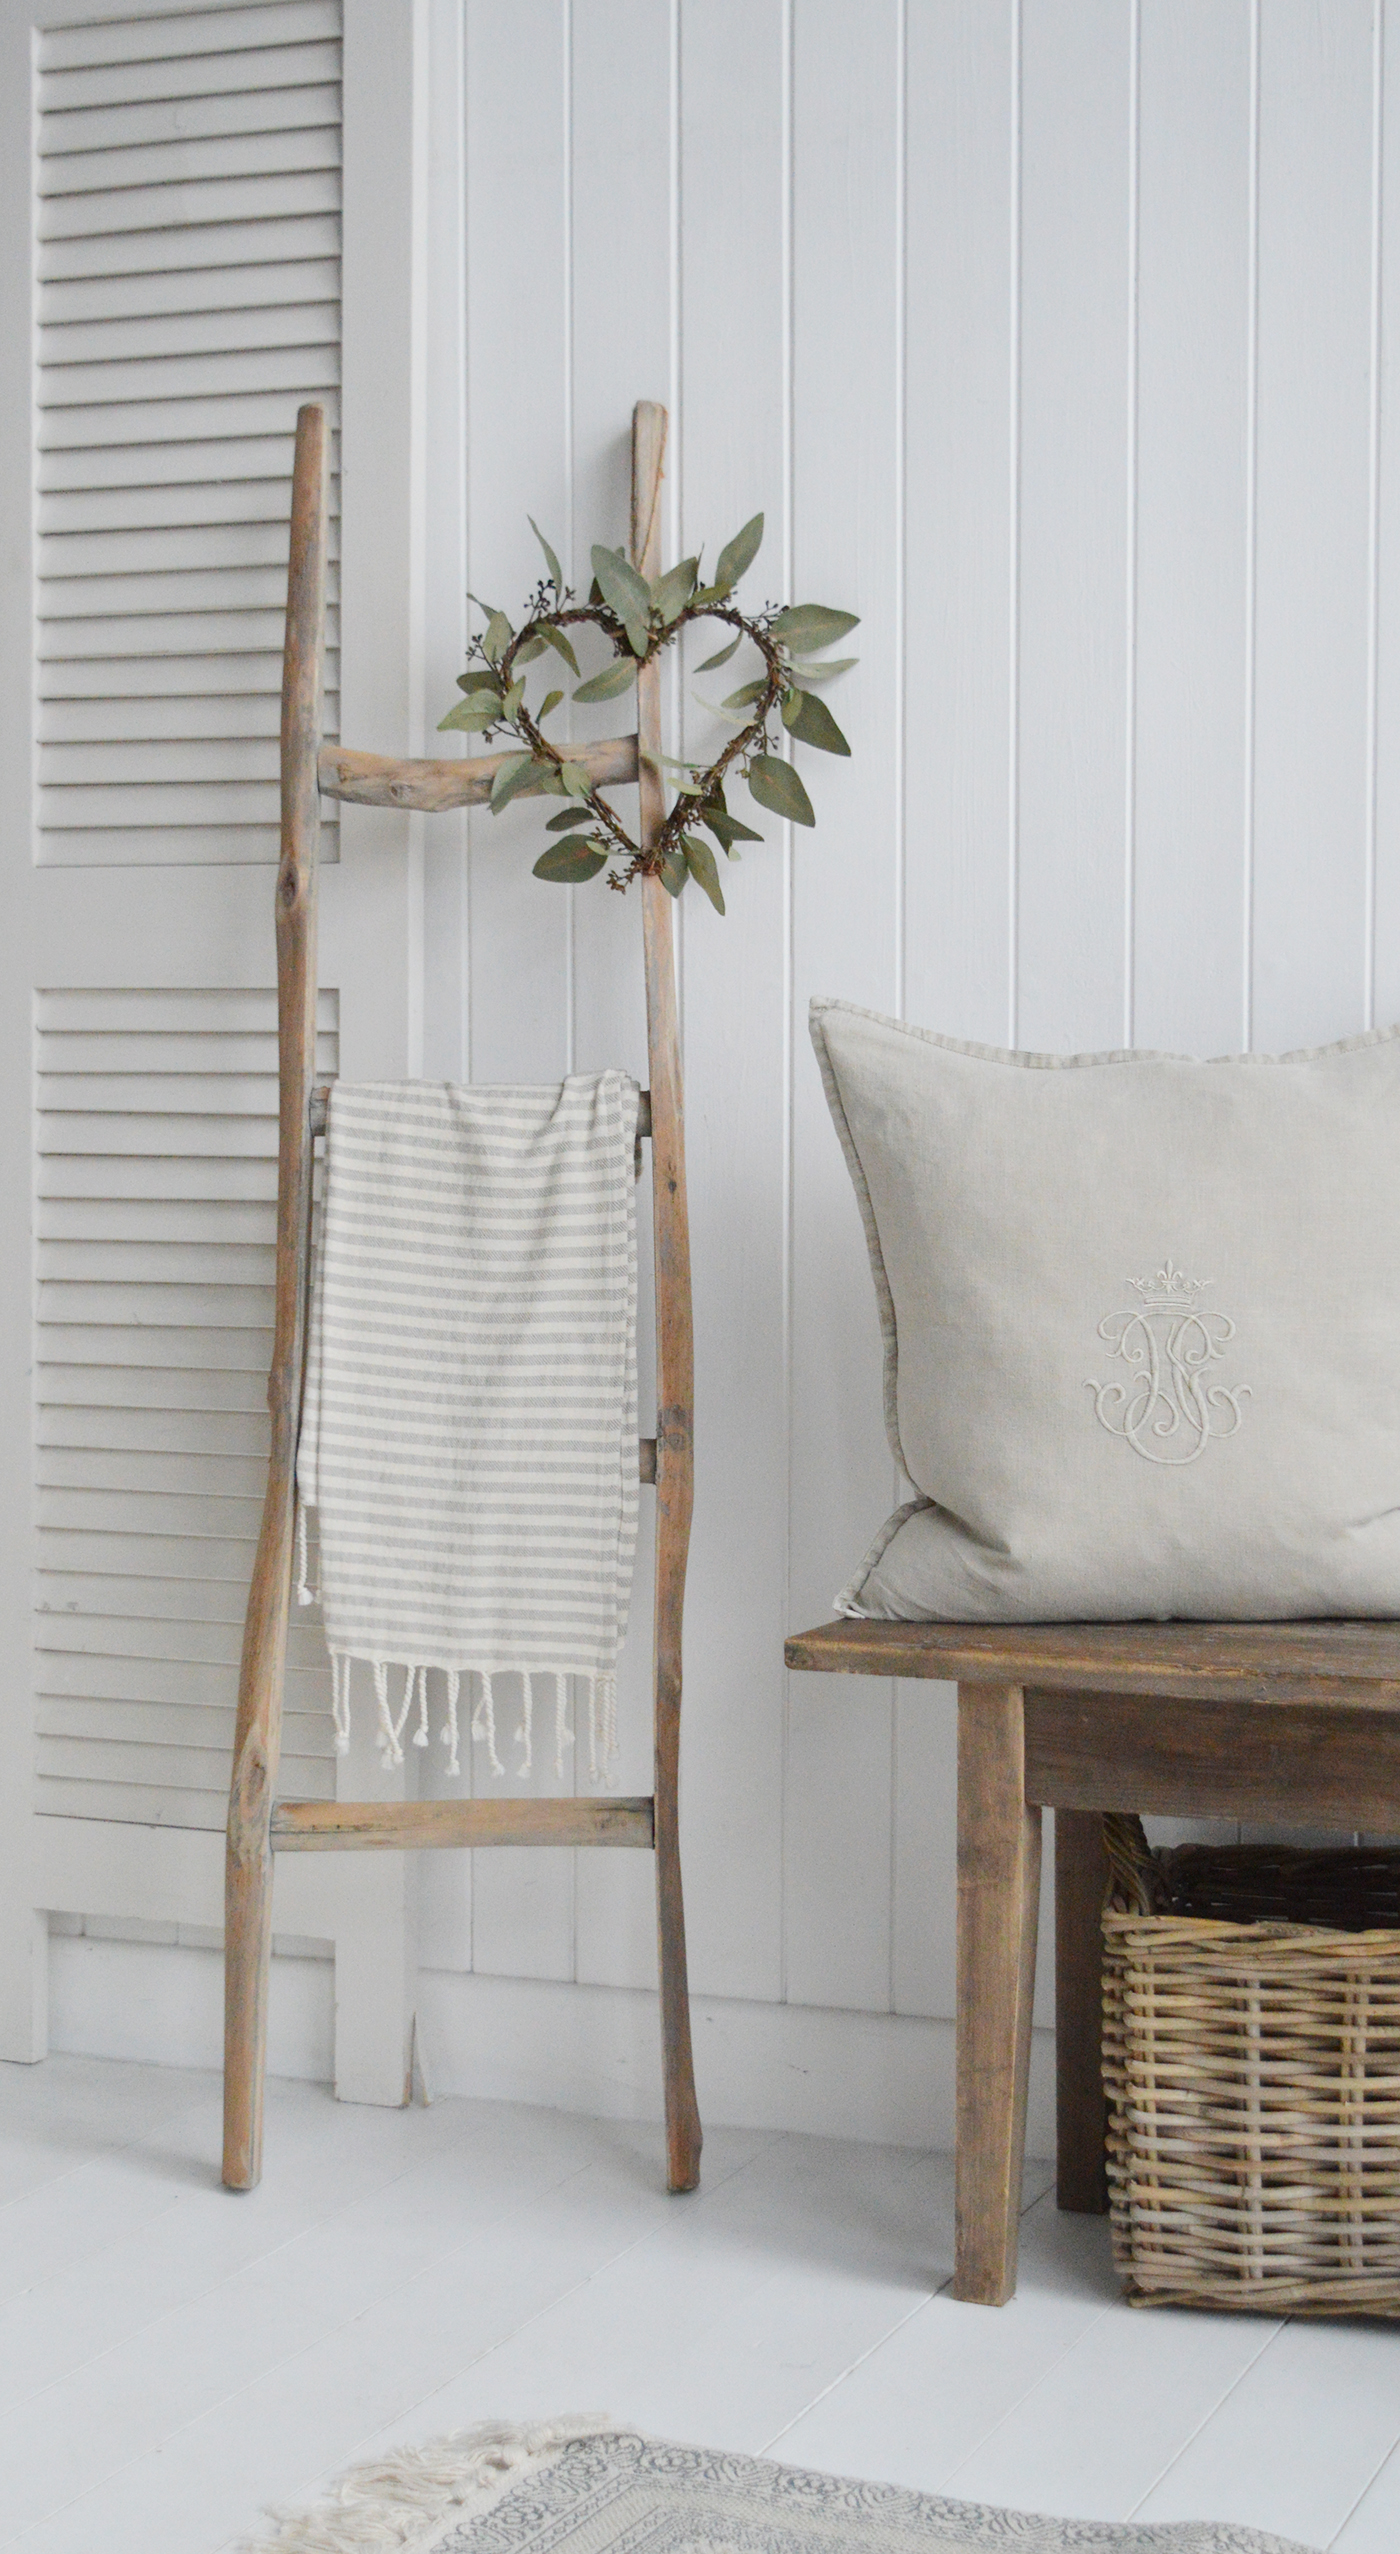 The driftwood blanket ladder in rustic modern country style interiors